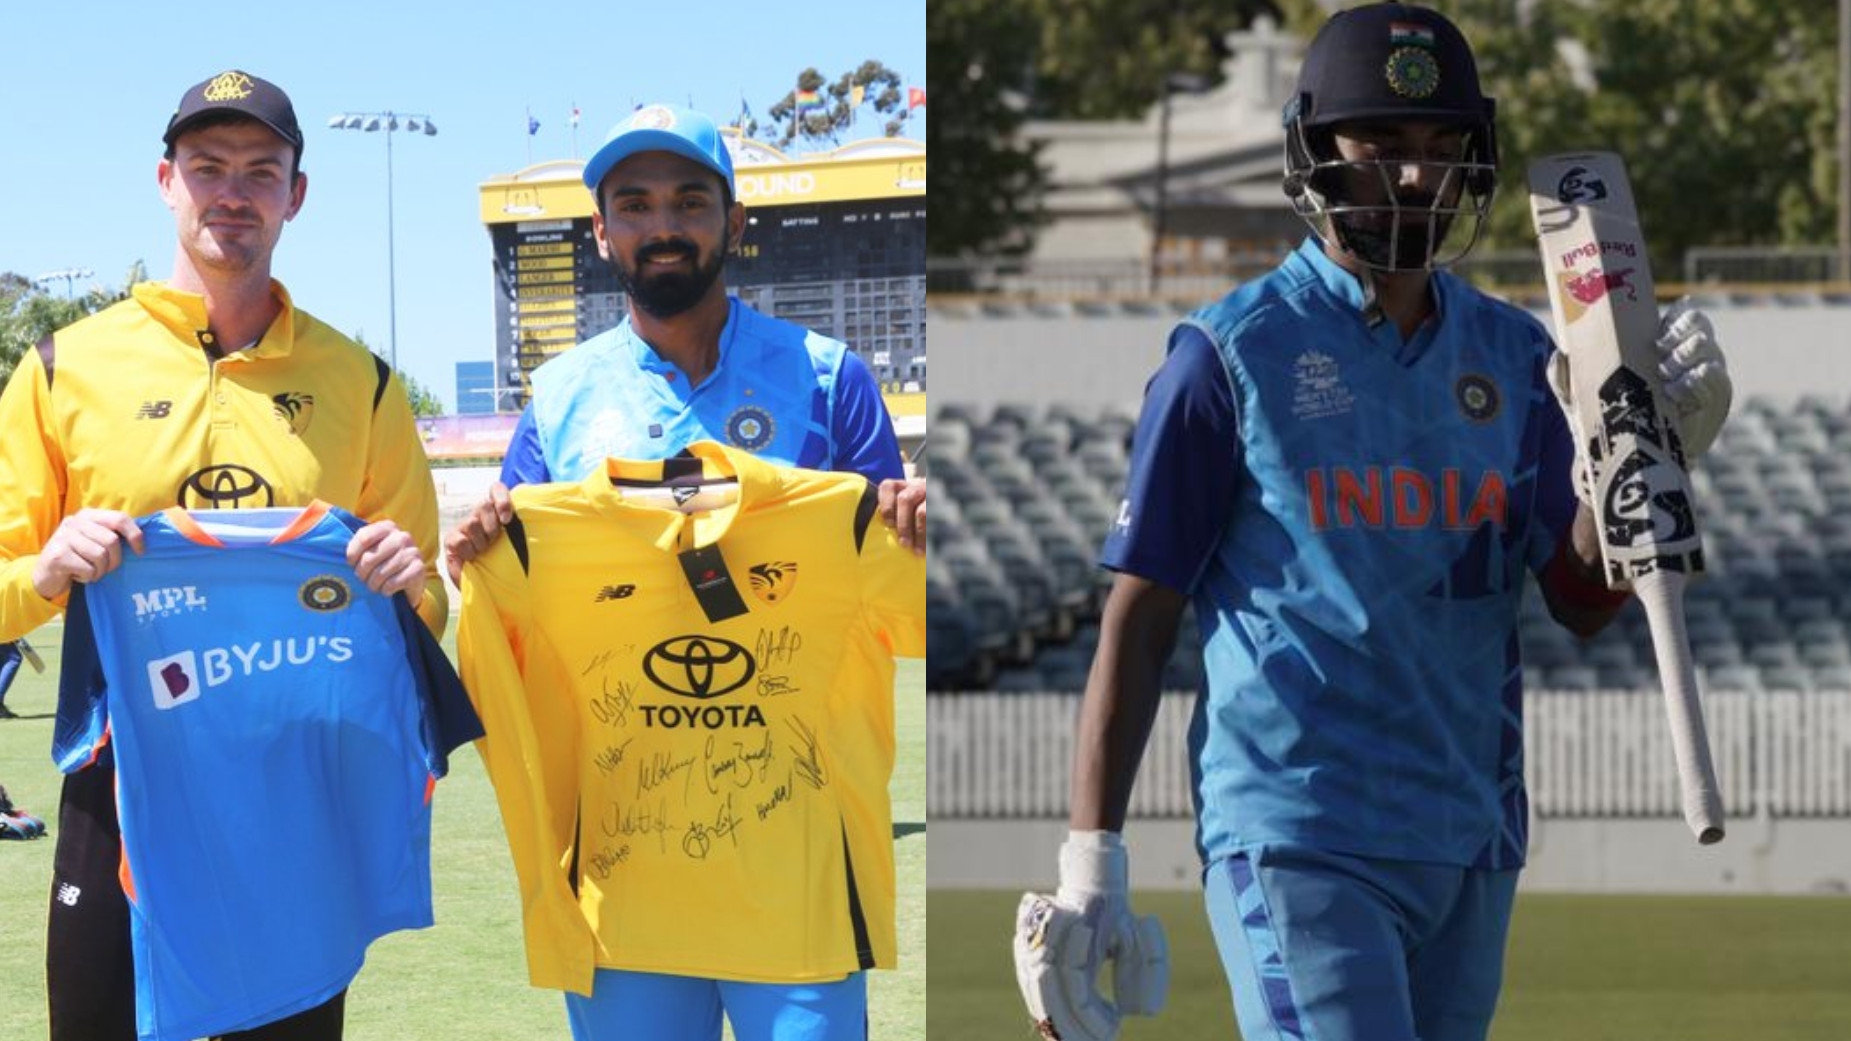 T20 World Cup 2022: India loses to WACA XI in second practice match by 36 runs; KL Rahul makes 74, Ashwin takes 3/32